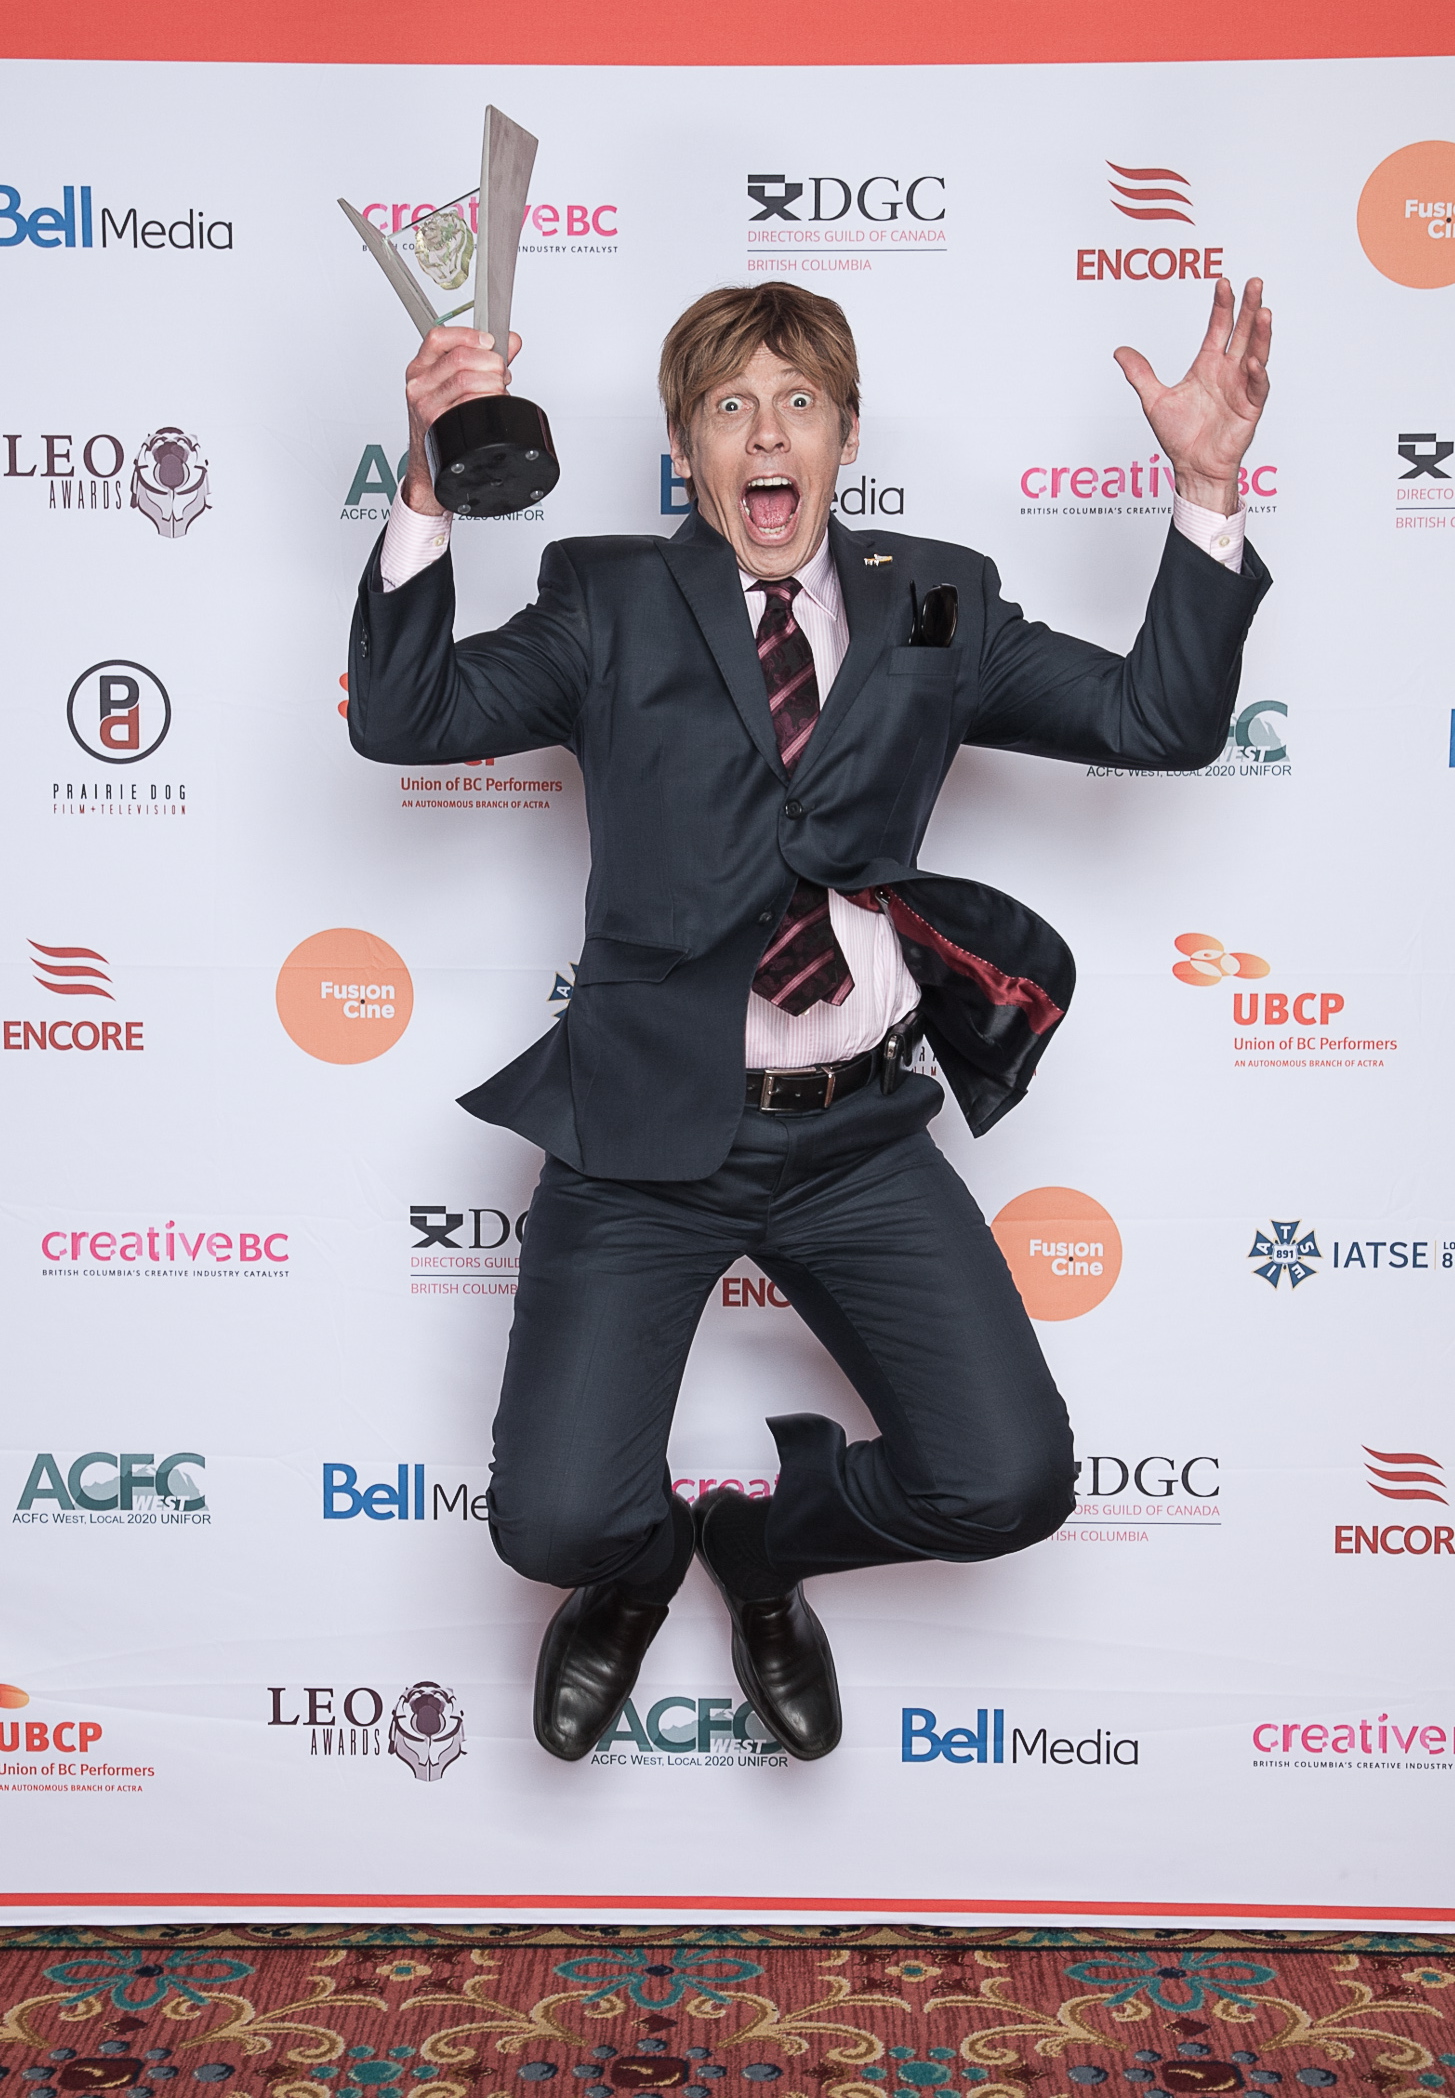 A little jump for joy winning a Leo Award for my role as 